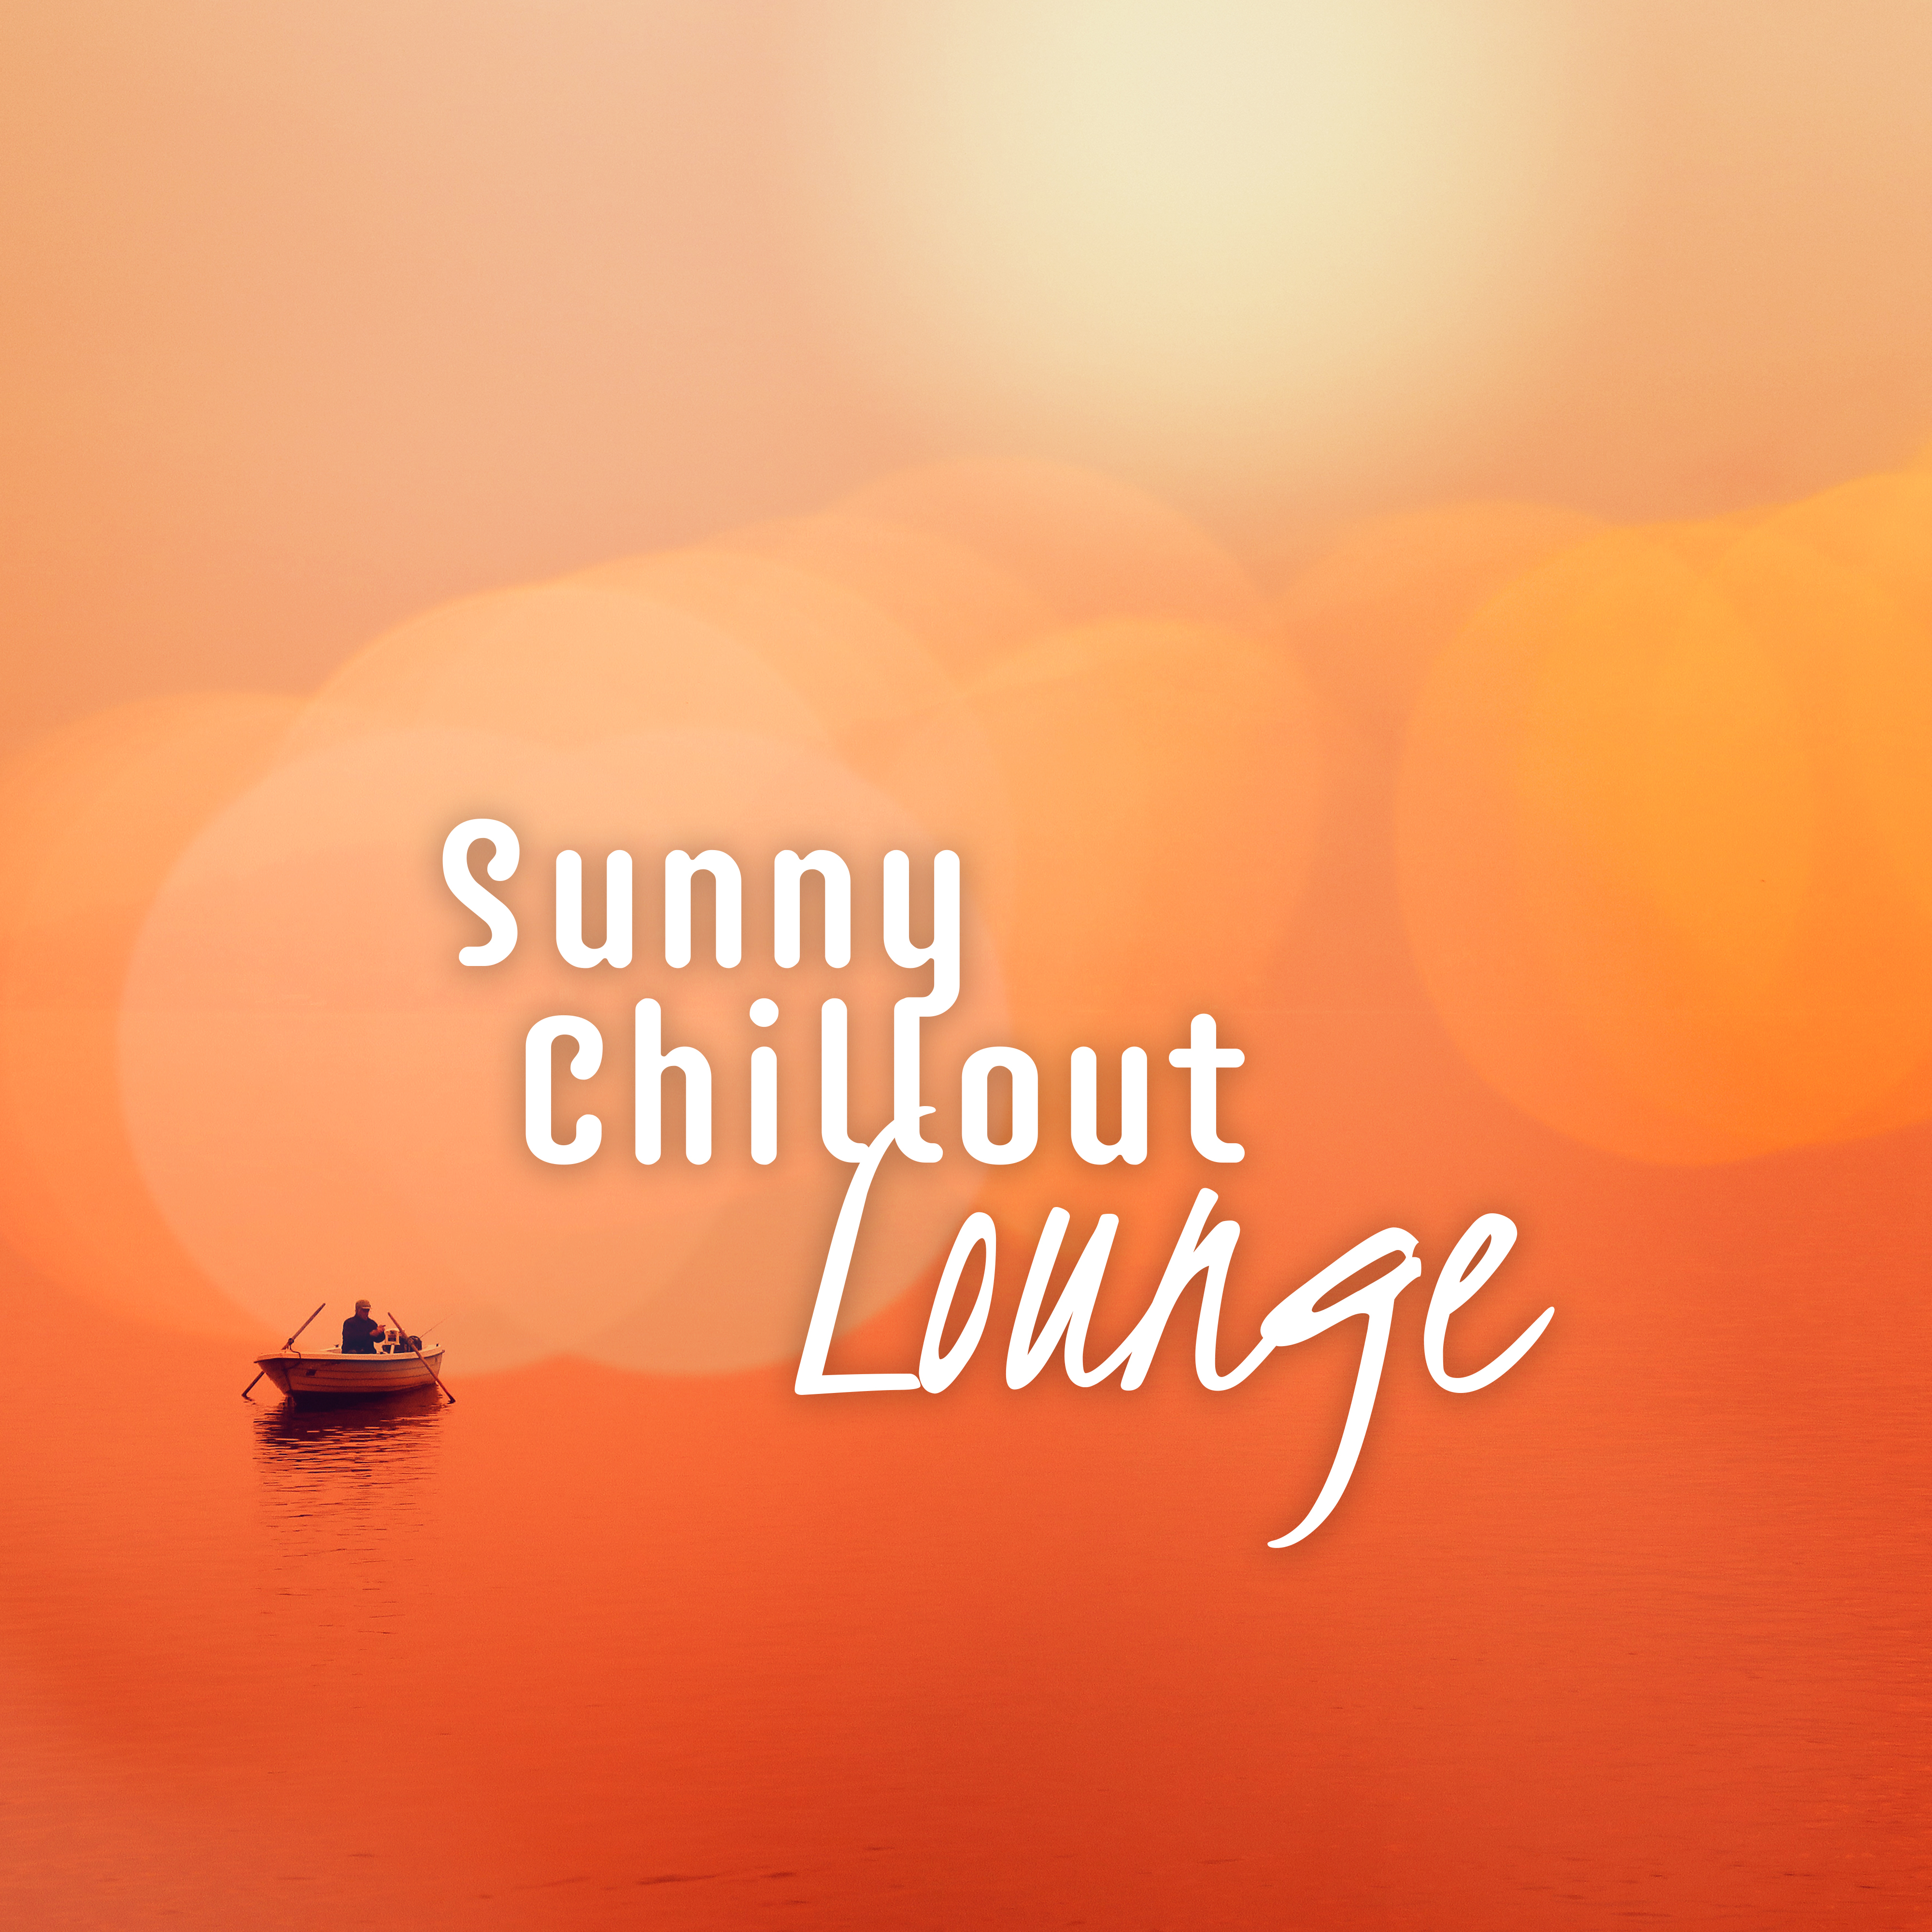 Sunny Chillout Lounge